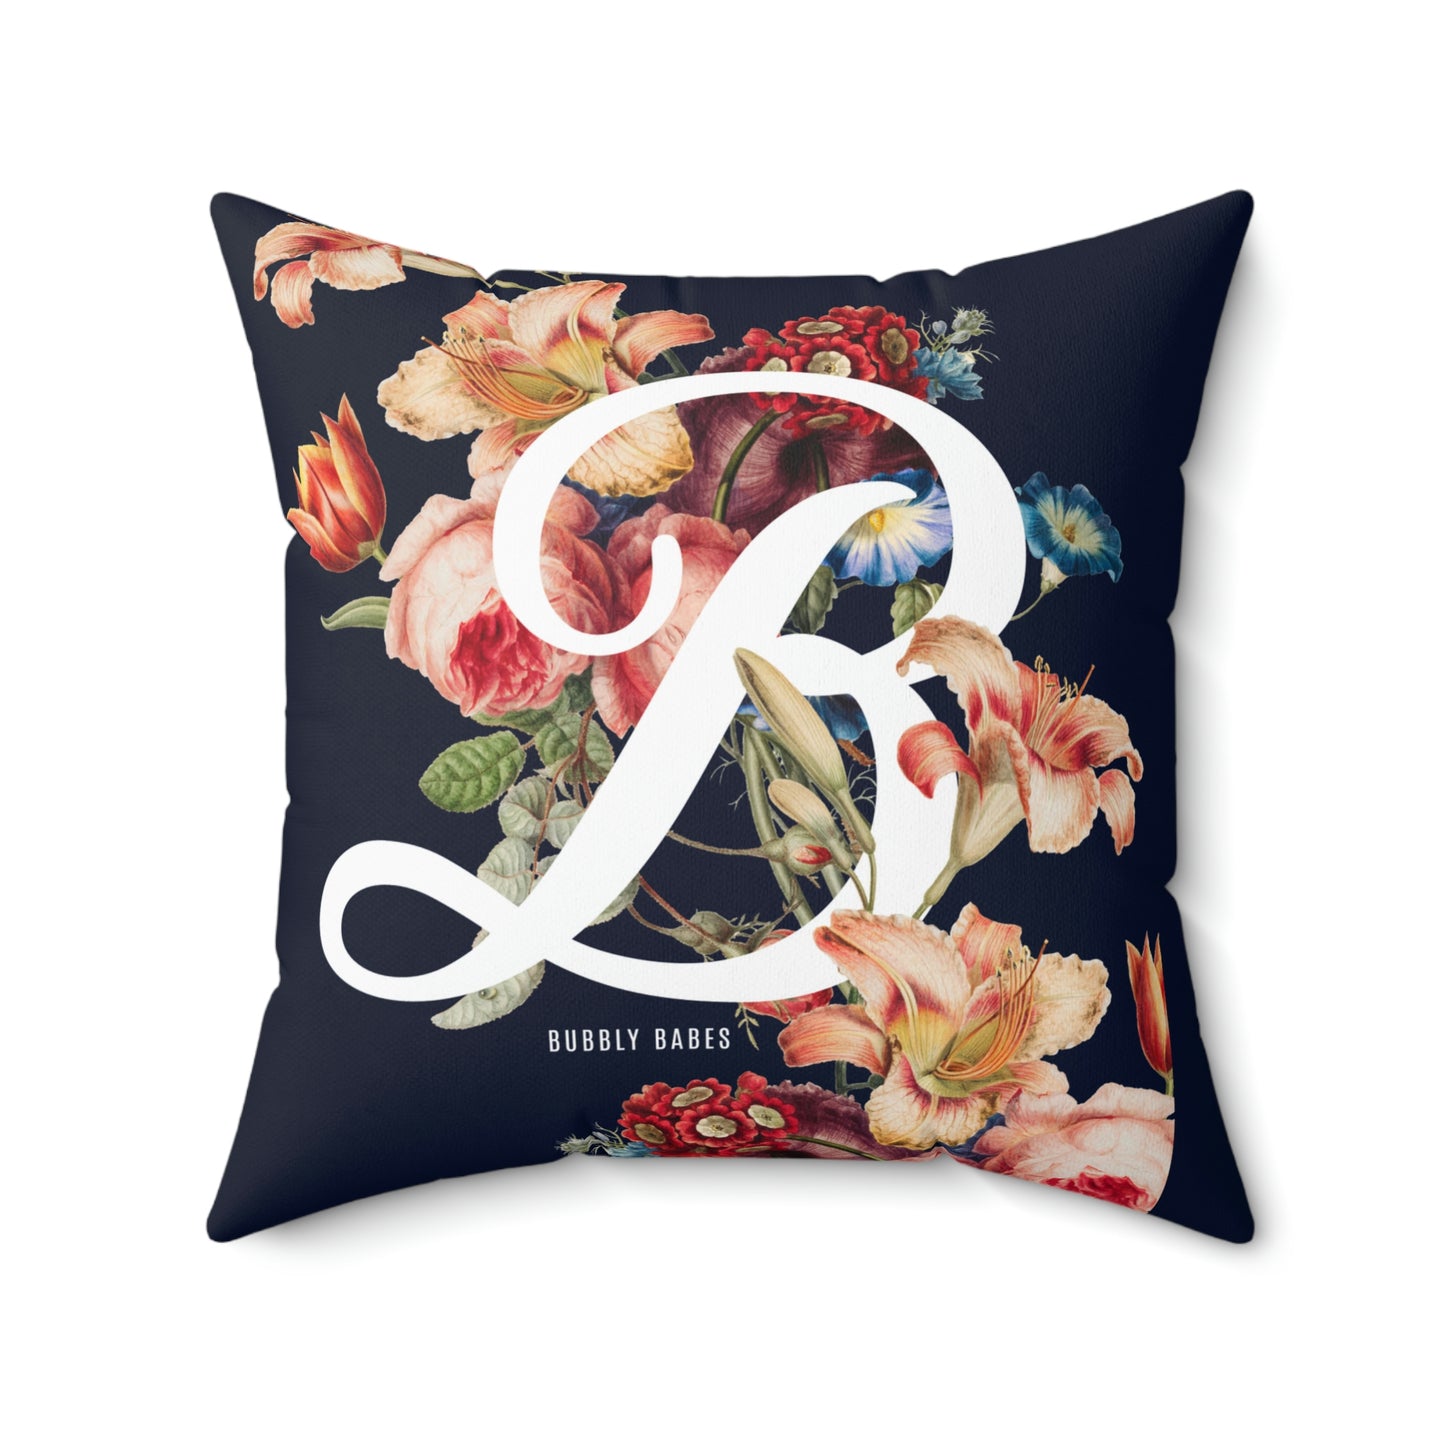 Personalized Polyester Square Floral Pillow 20x20